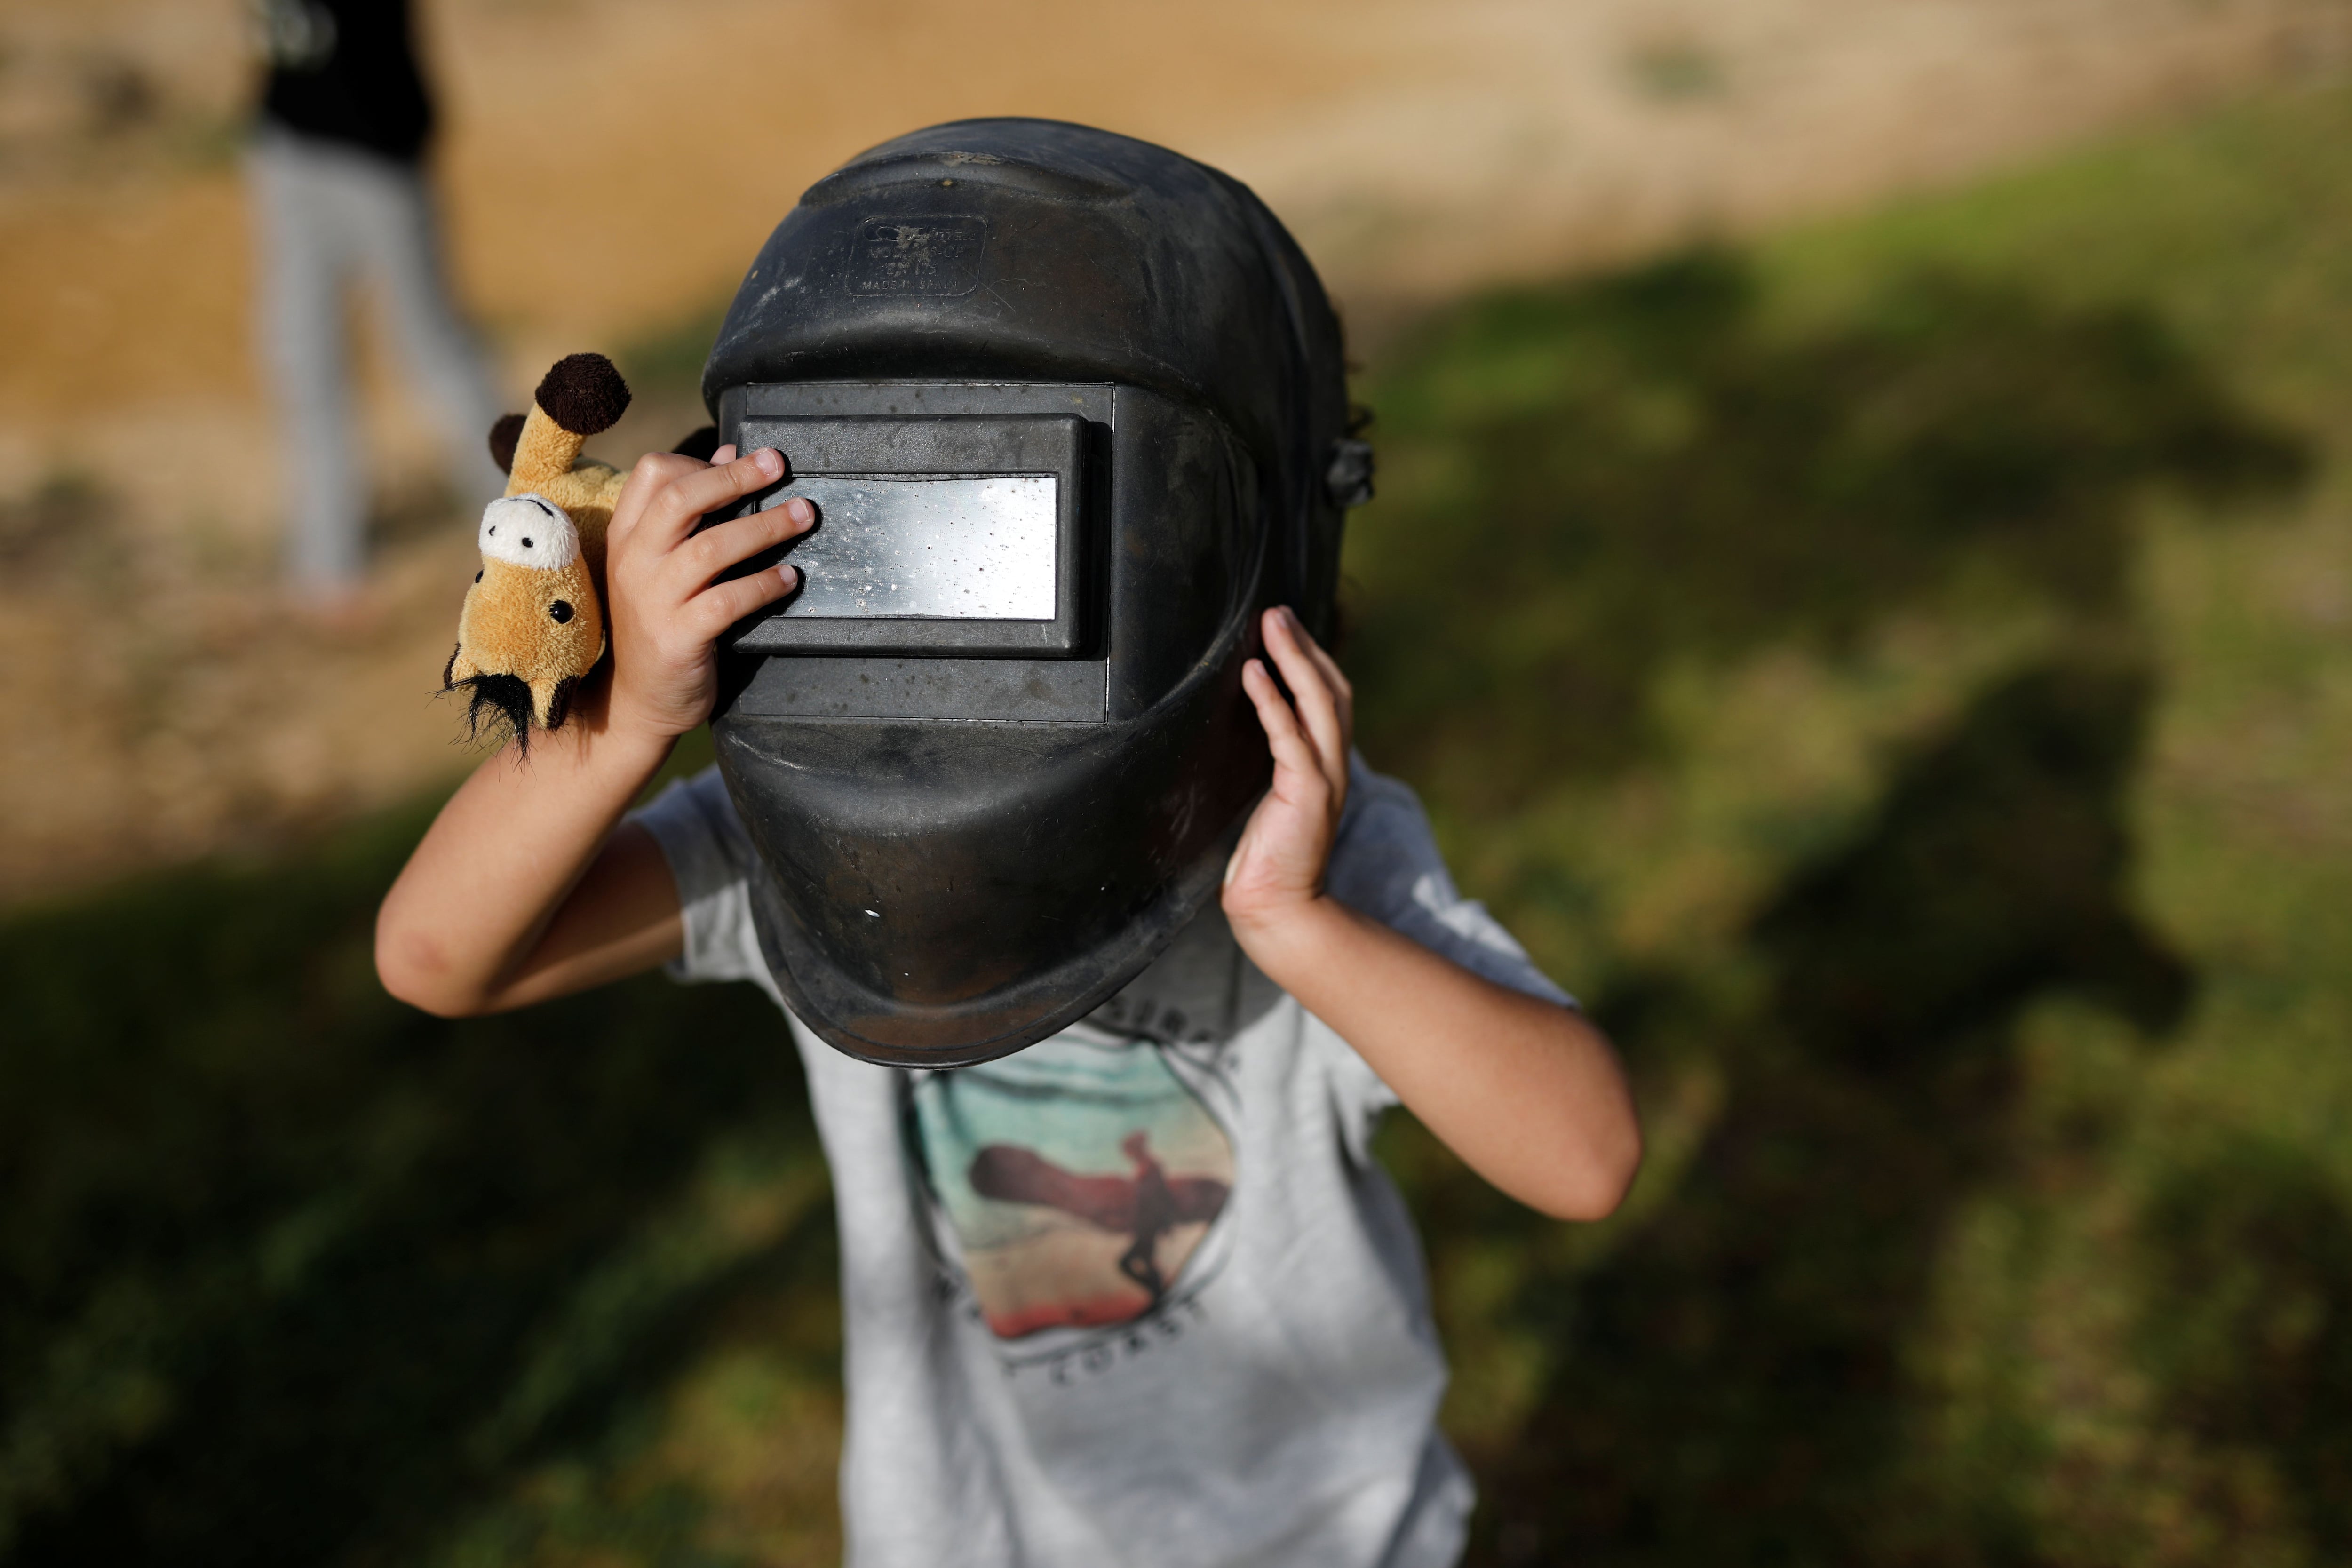 A boy wears a welding helmet as protection to observe a partial solar eclipse from Yeruham, southern Israel June 21, 2020. REUTERS/Amir Cohen